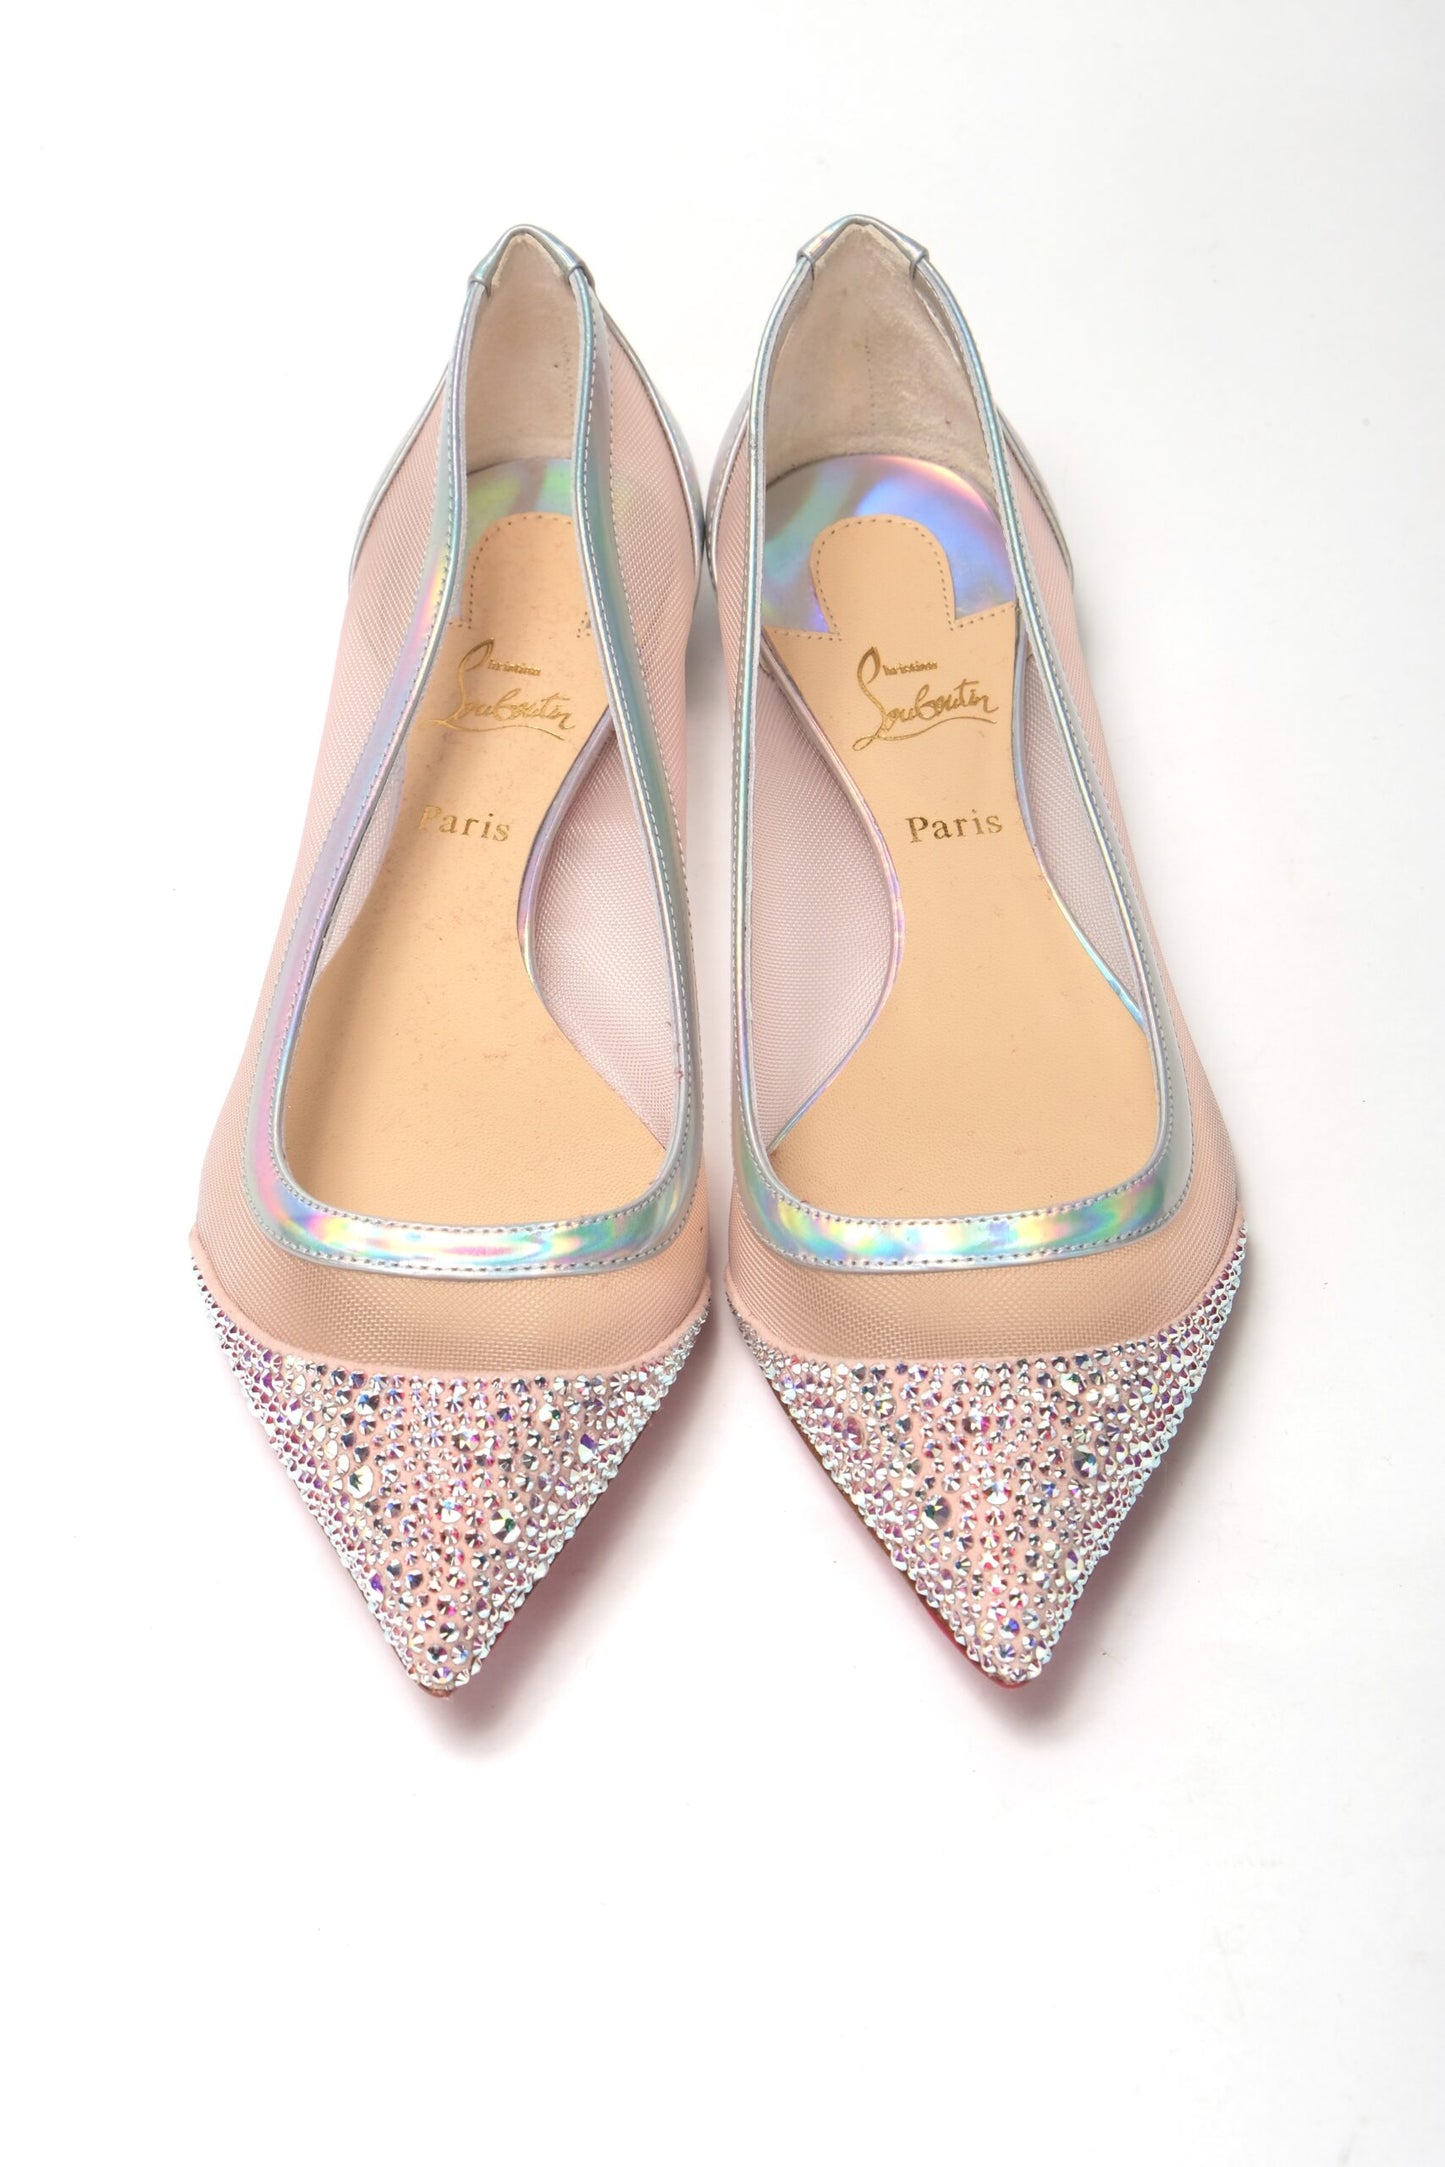 Silver Rose Flat Point Crystals Toe Shoe